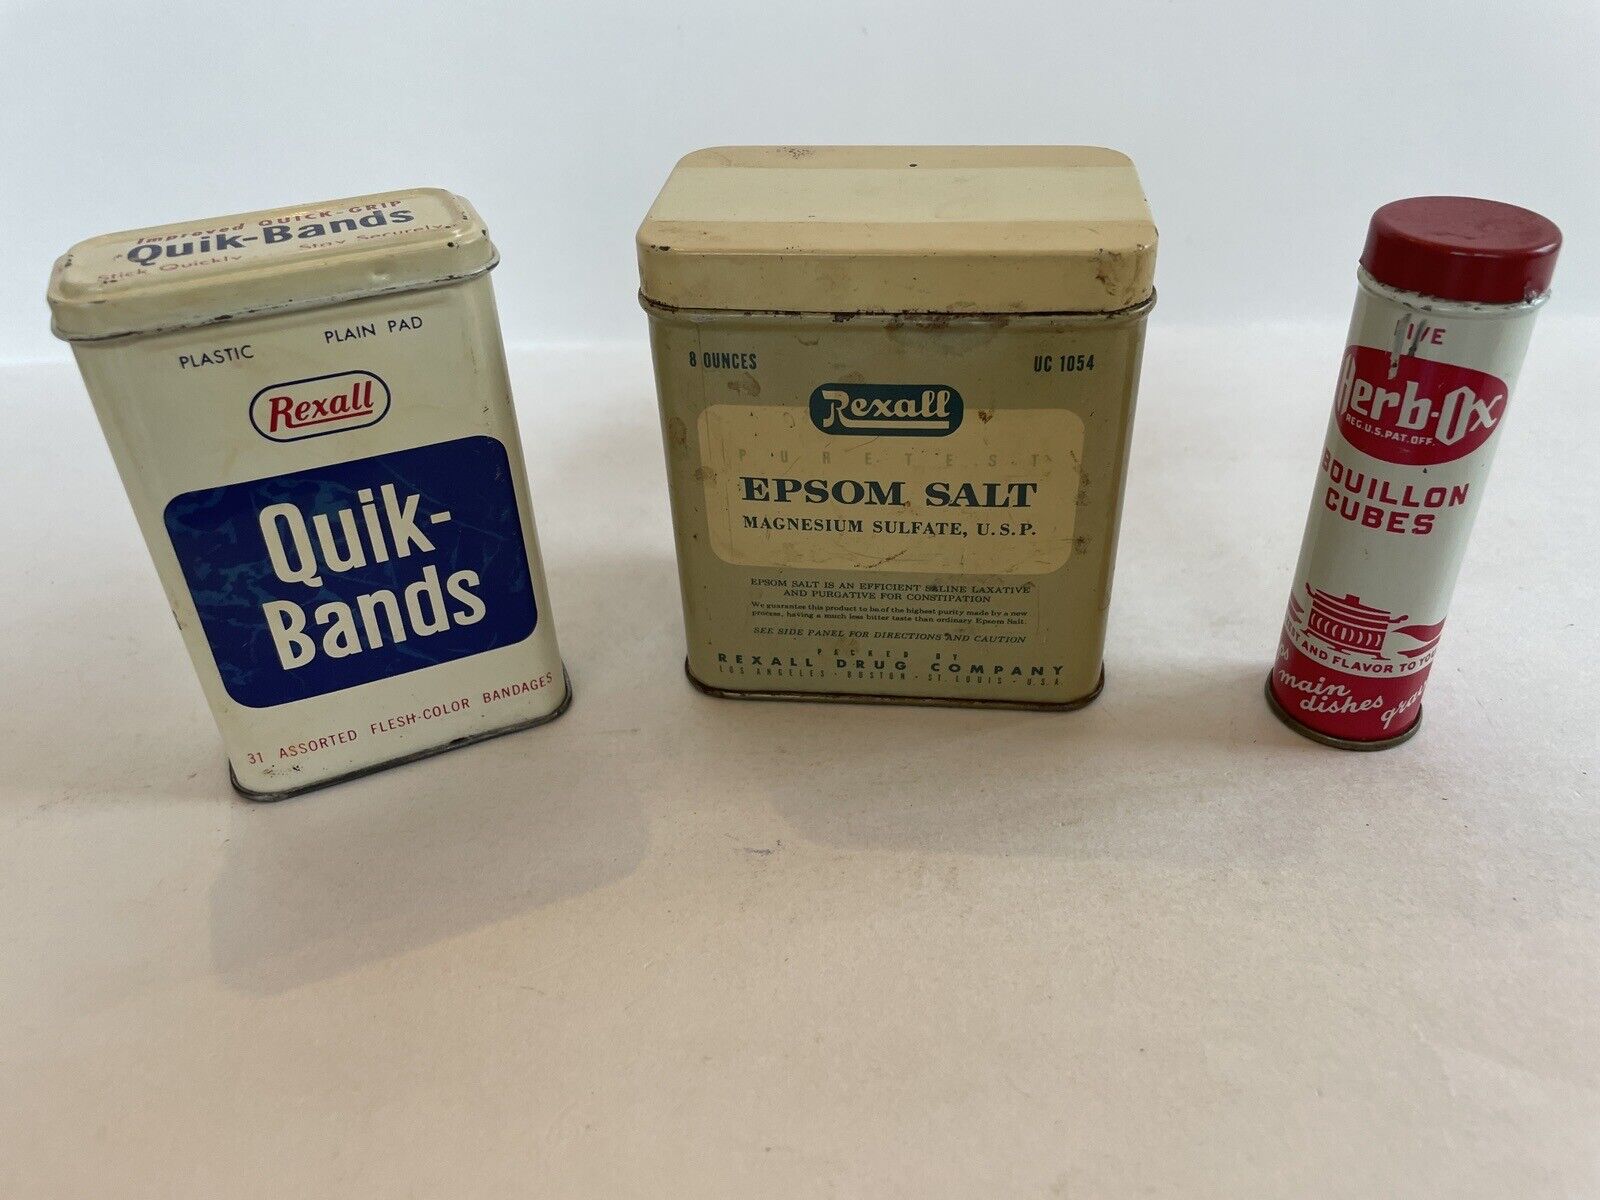 Vintage Rexall Epsom Salt & Quik Bands Tin Containers,13 band aids & Herb-Ox Tin